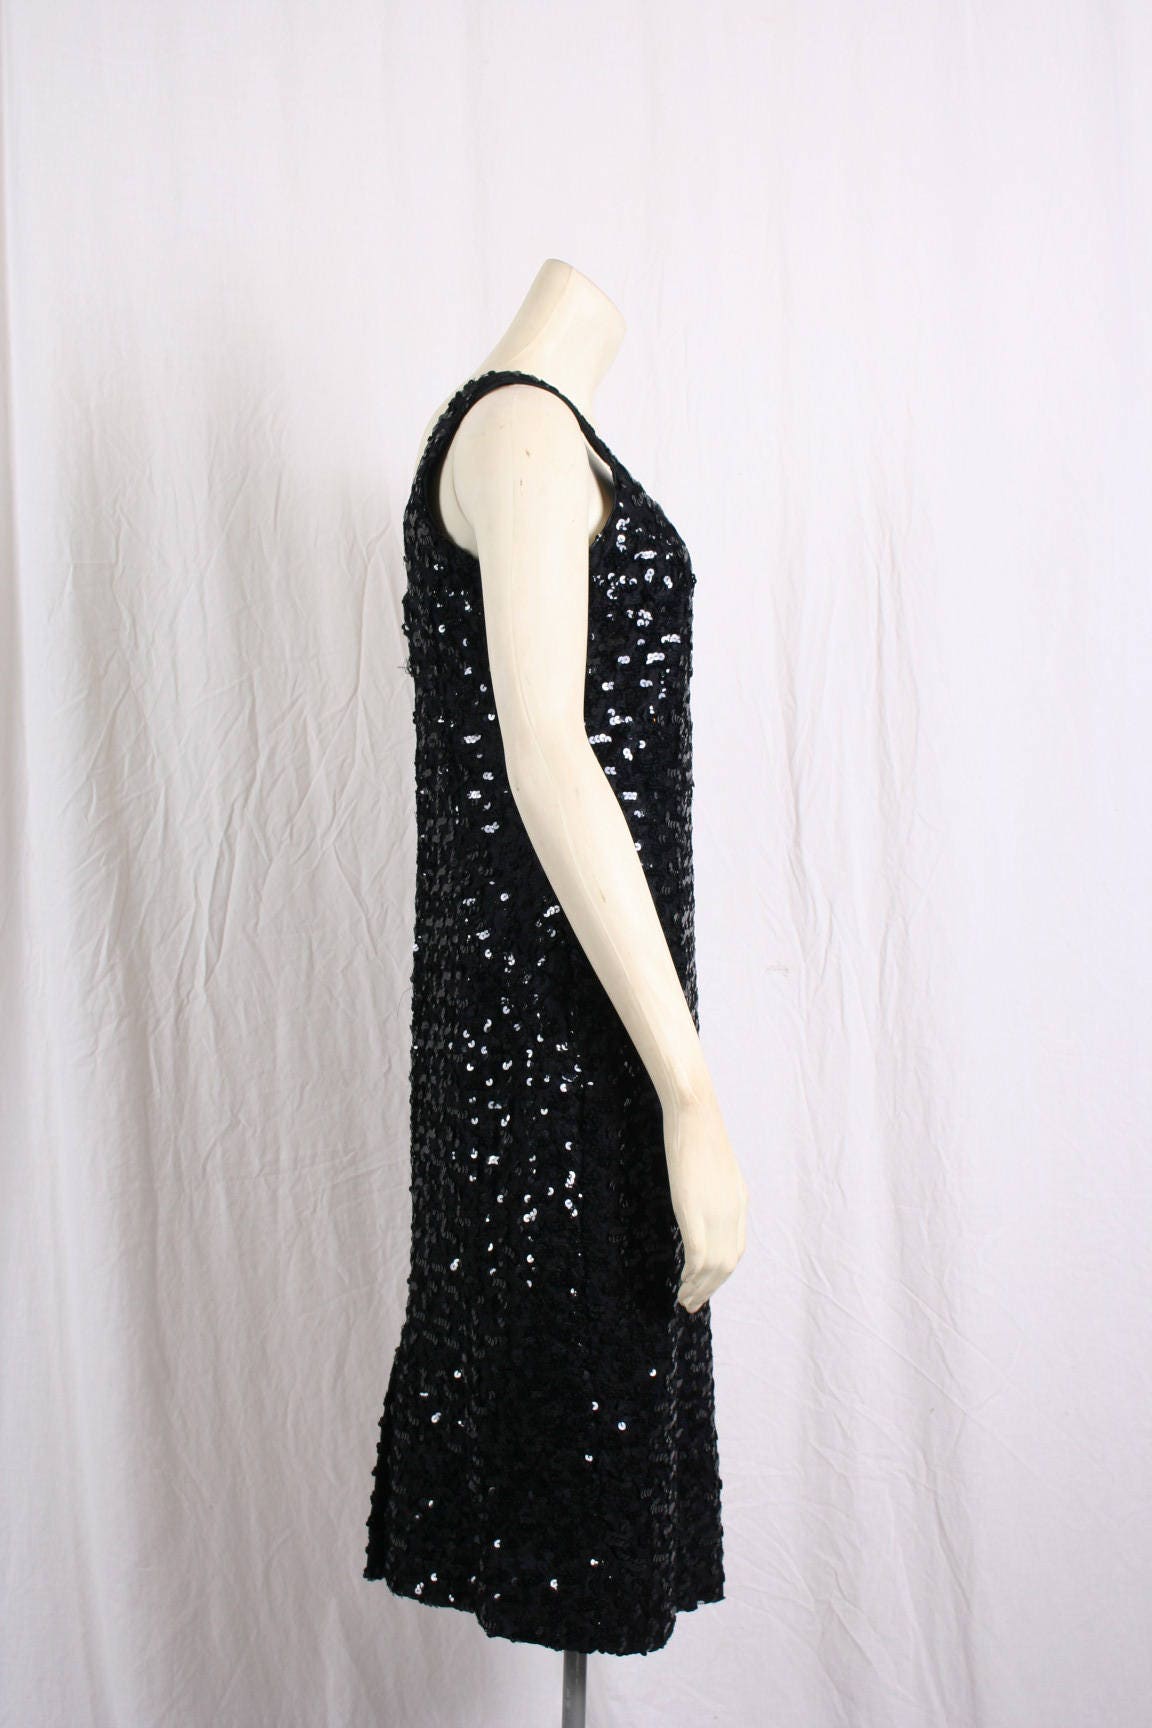 Vintage 80s black SEQUIN EVENING DRESS prom gown Bodycon | Etsy